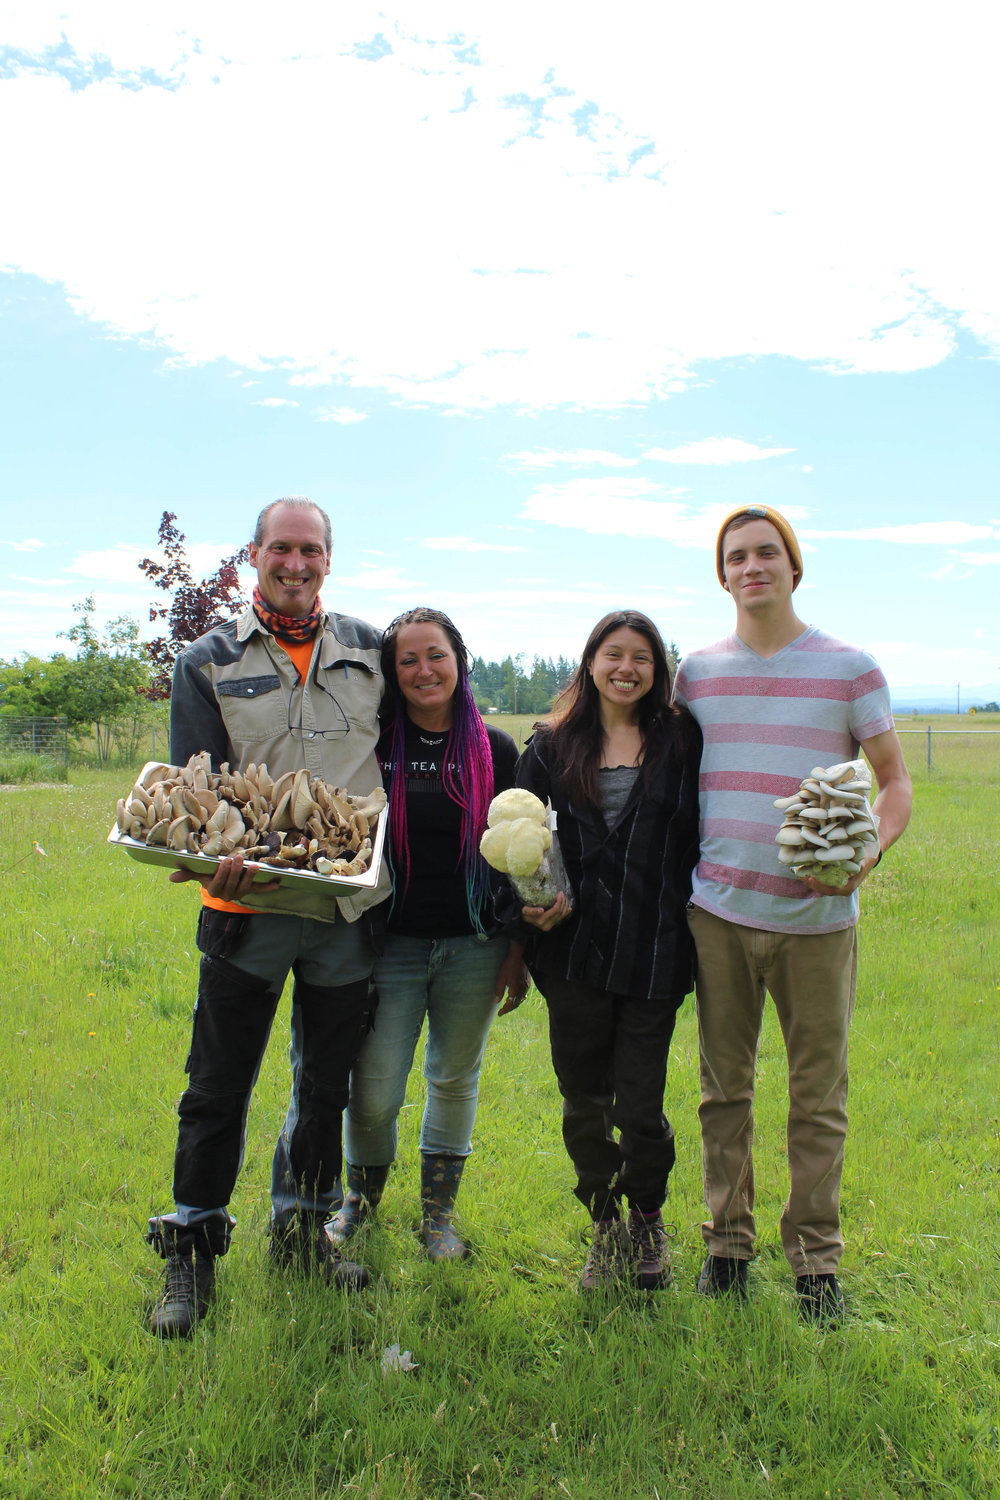 Raven's Wind Farm owners Robert Zozaya and Rainy Karnes were joined in their mushroom growing business in April by Zozoya's son, Braidin Zozoya and Braidin's girlfriend Karen Gonzalez, who also makes and sells sewn bags and hats for her business, A String Fling..